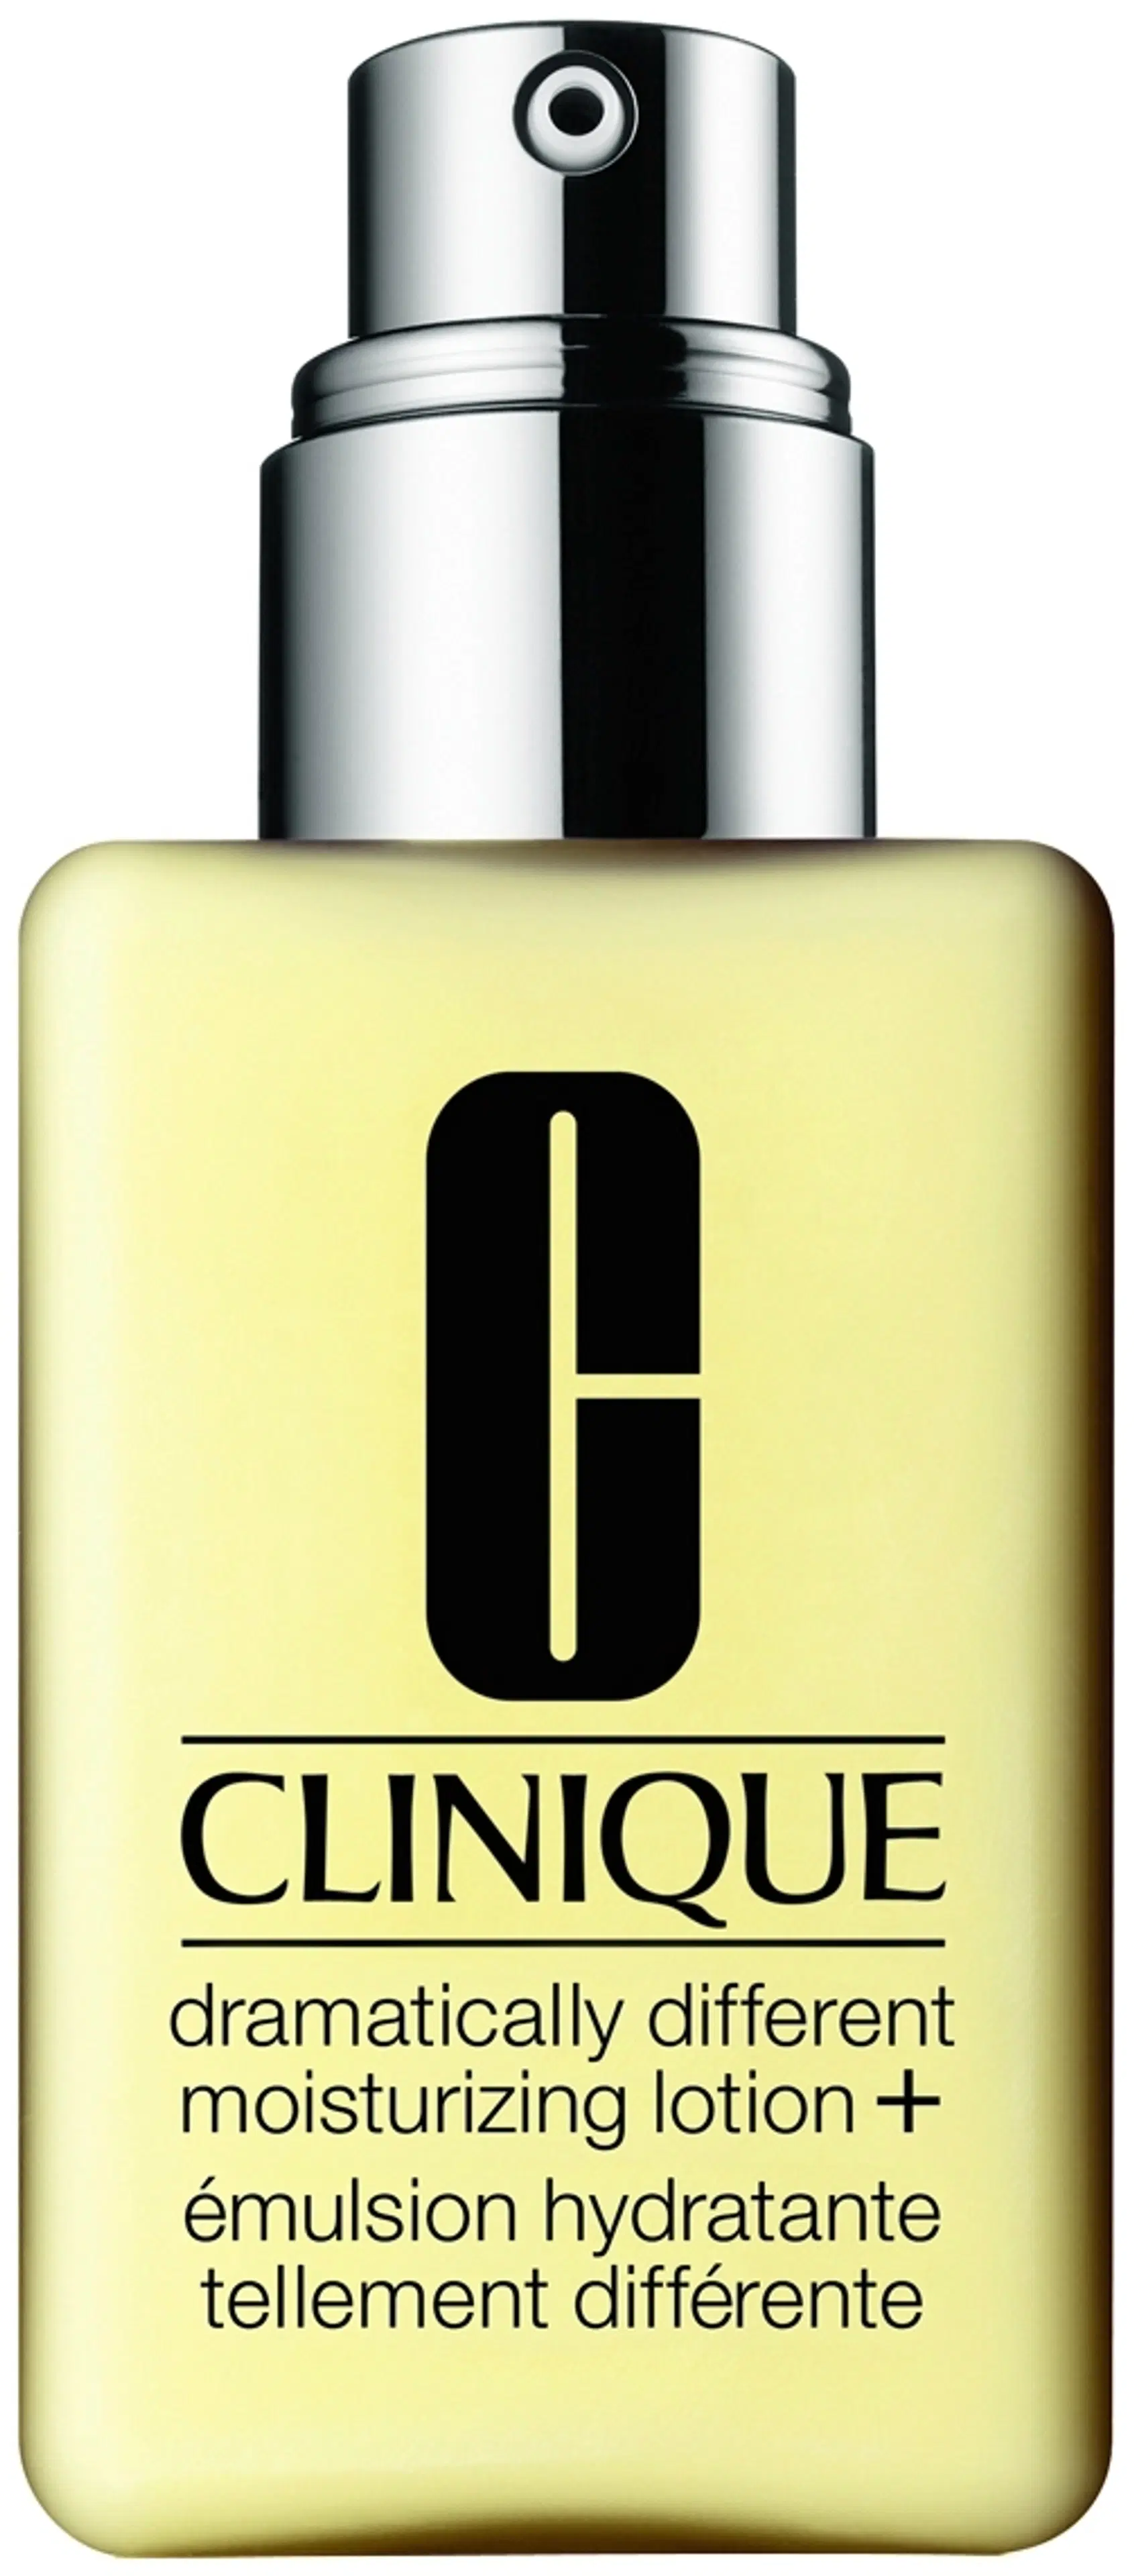 Clinique Dramatically Different Moisturizing Lotion+ kosteusemulsio 200 ml